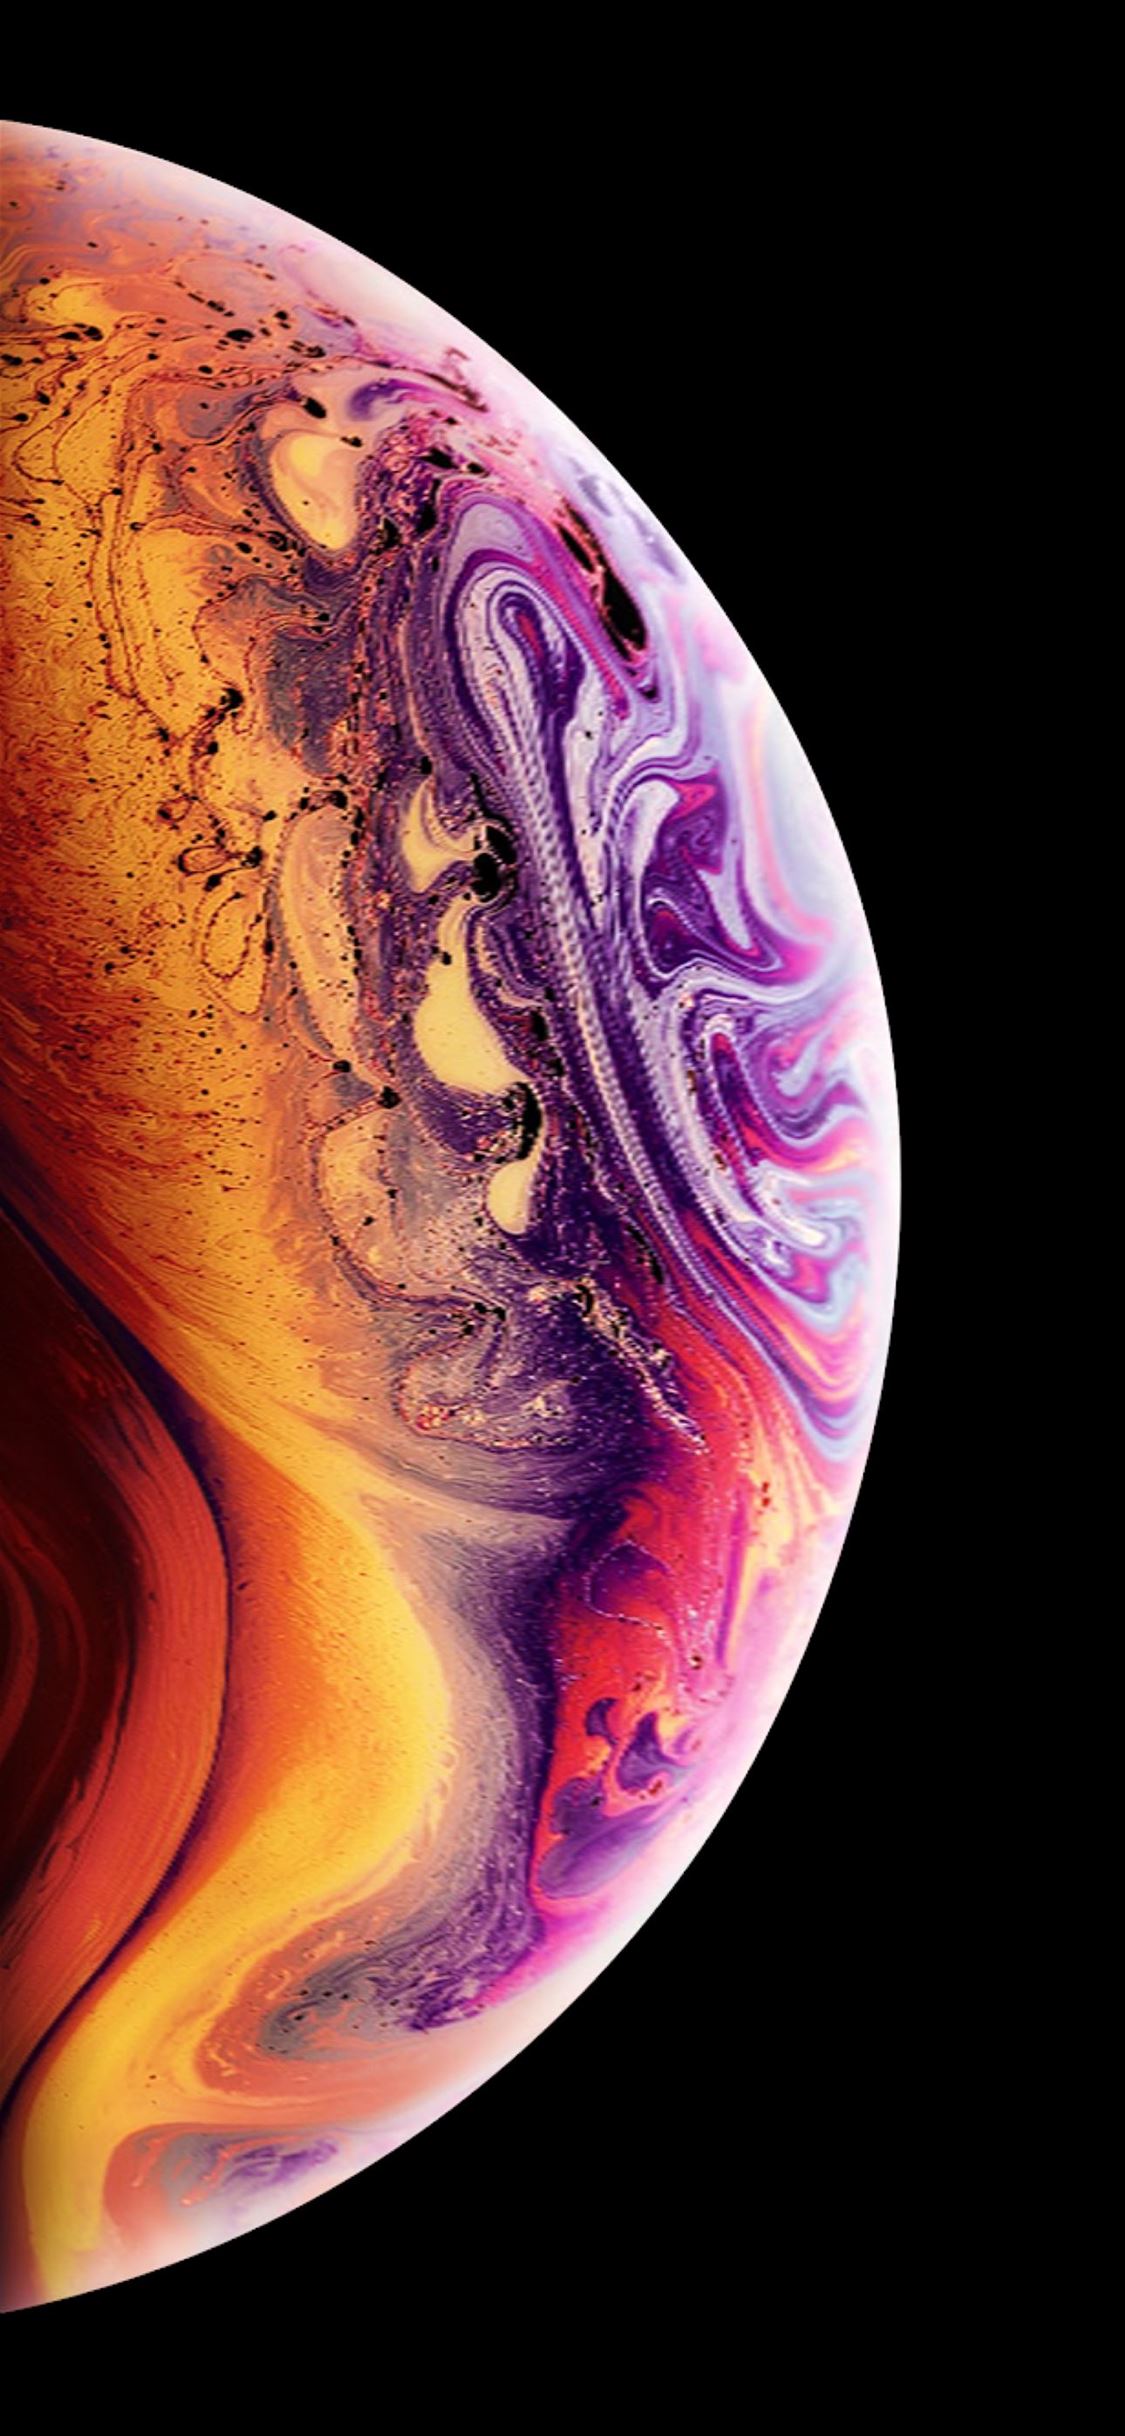 Cool Wallpapers Iphone X